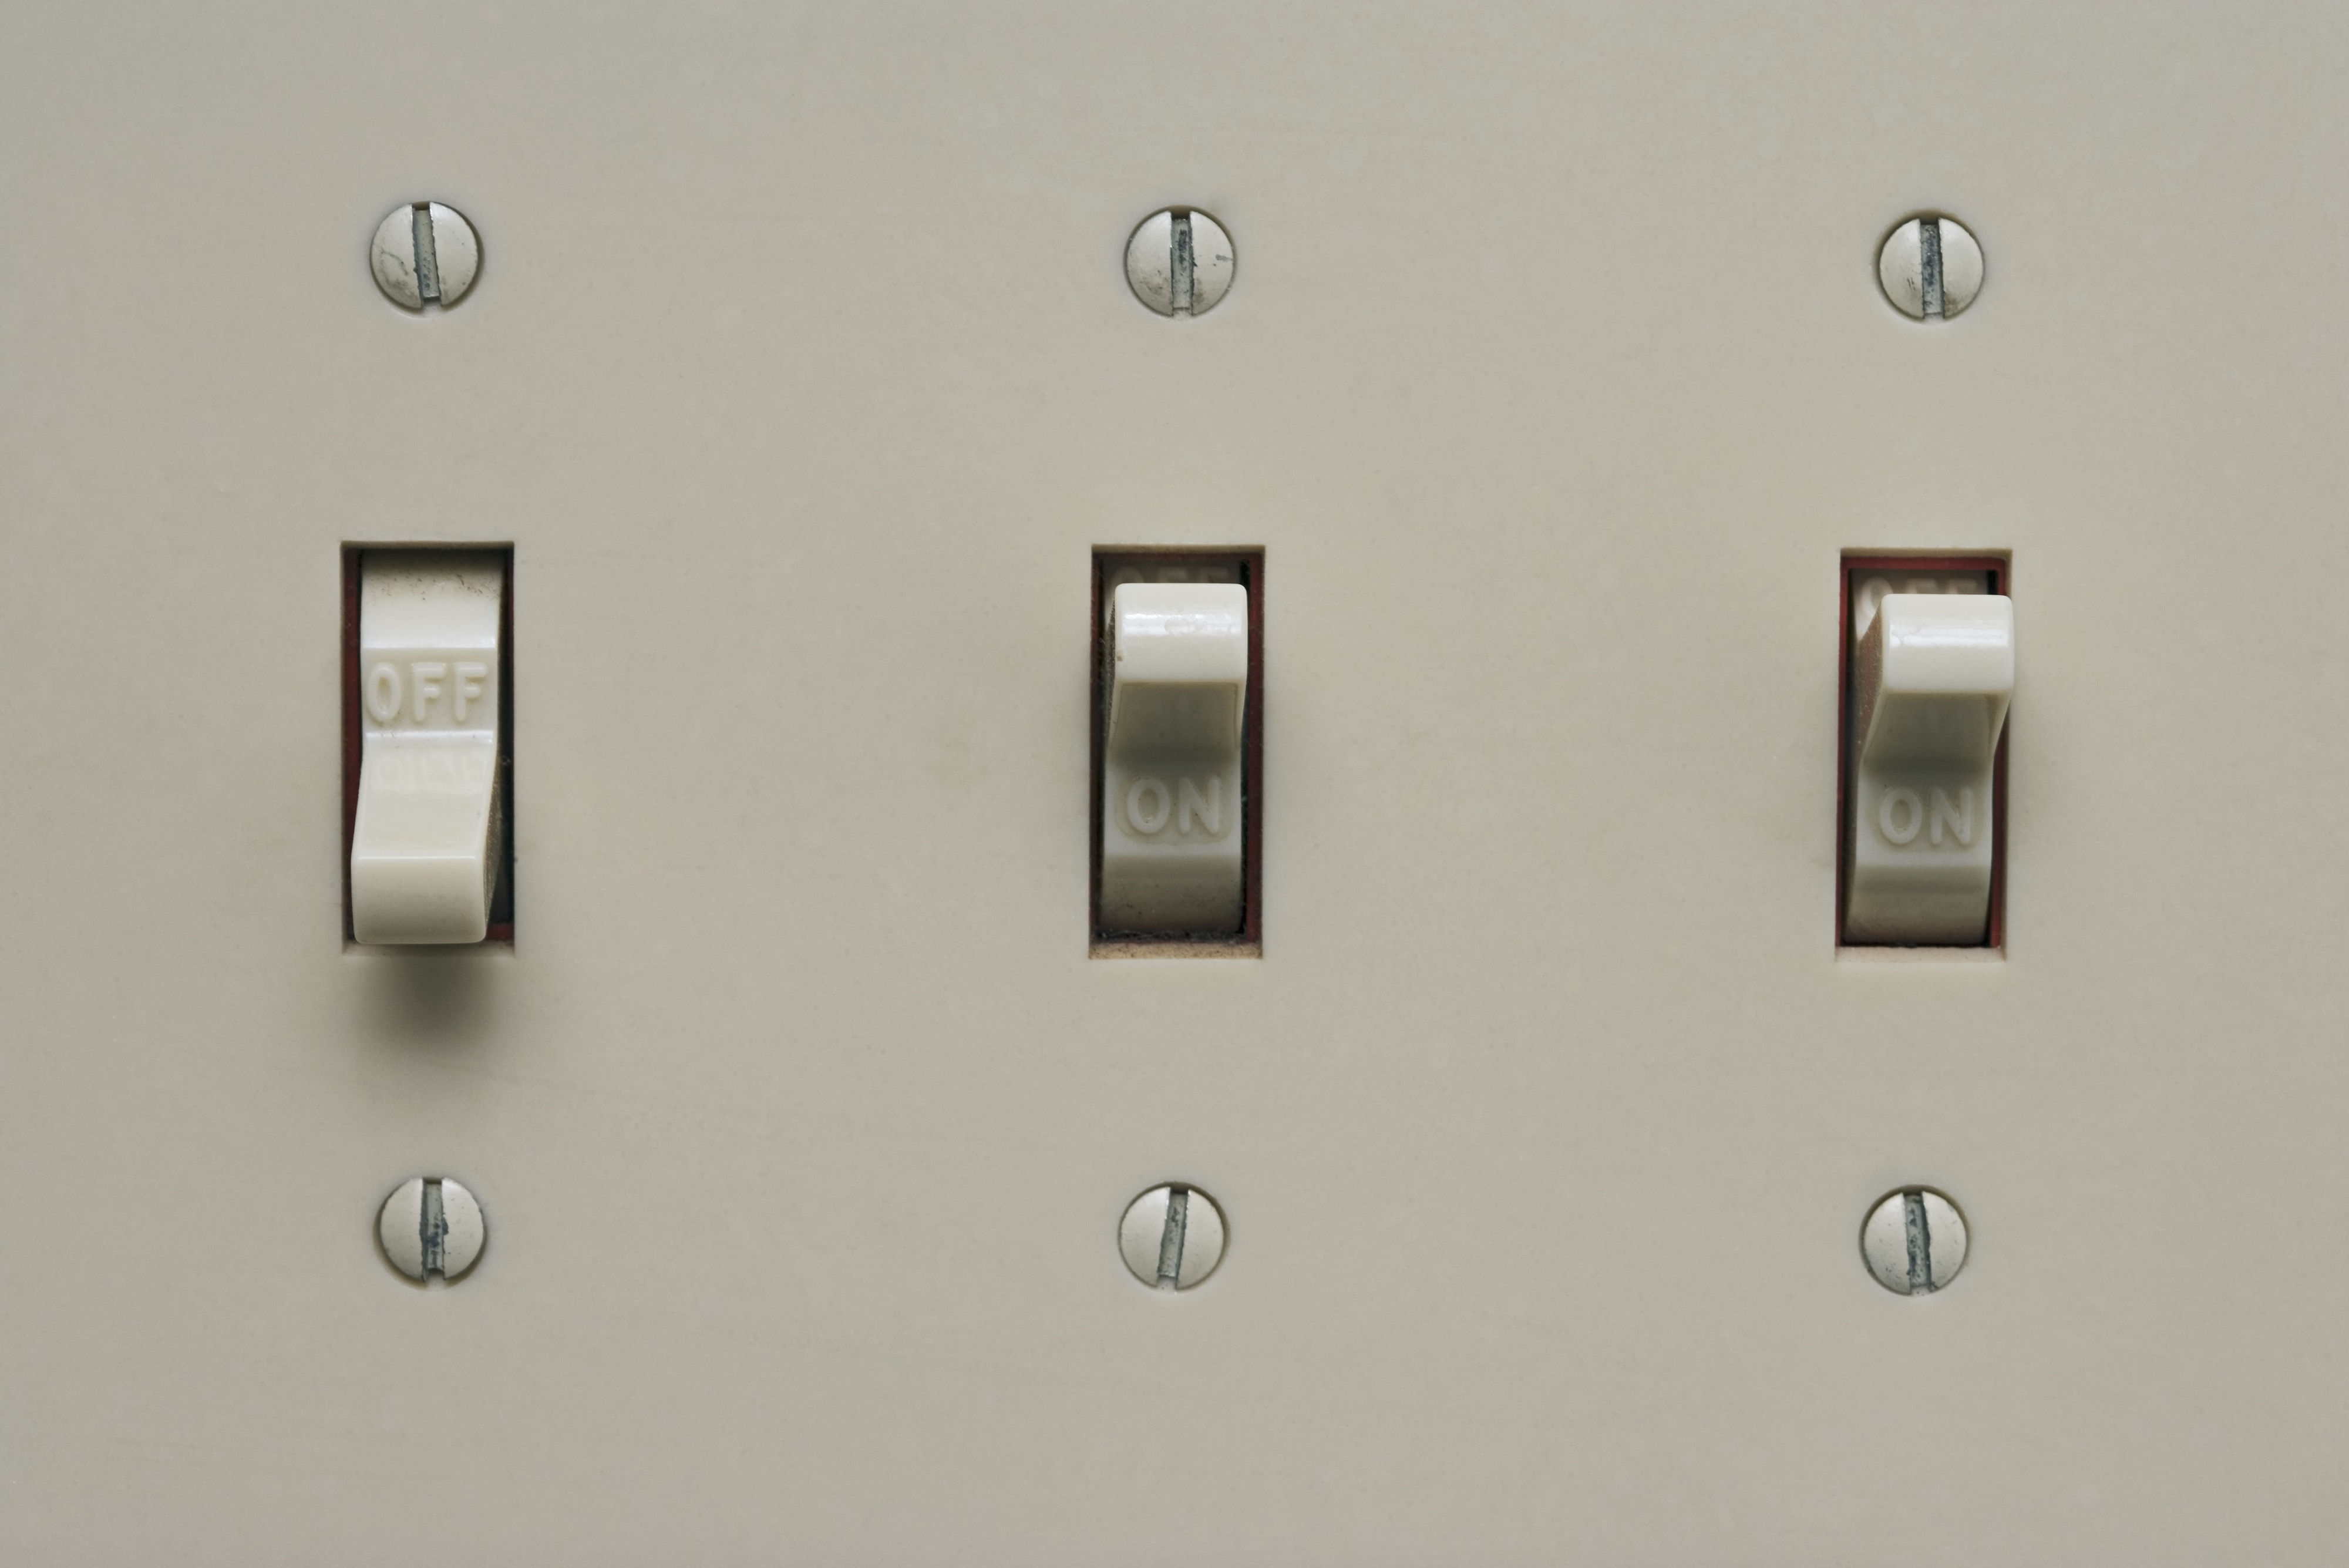 Three light switches on a wall, with the middle switch in the &#x27;ON&#x27; position and the others &#x27;OFF&#x27;